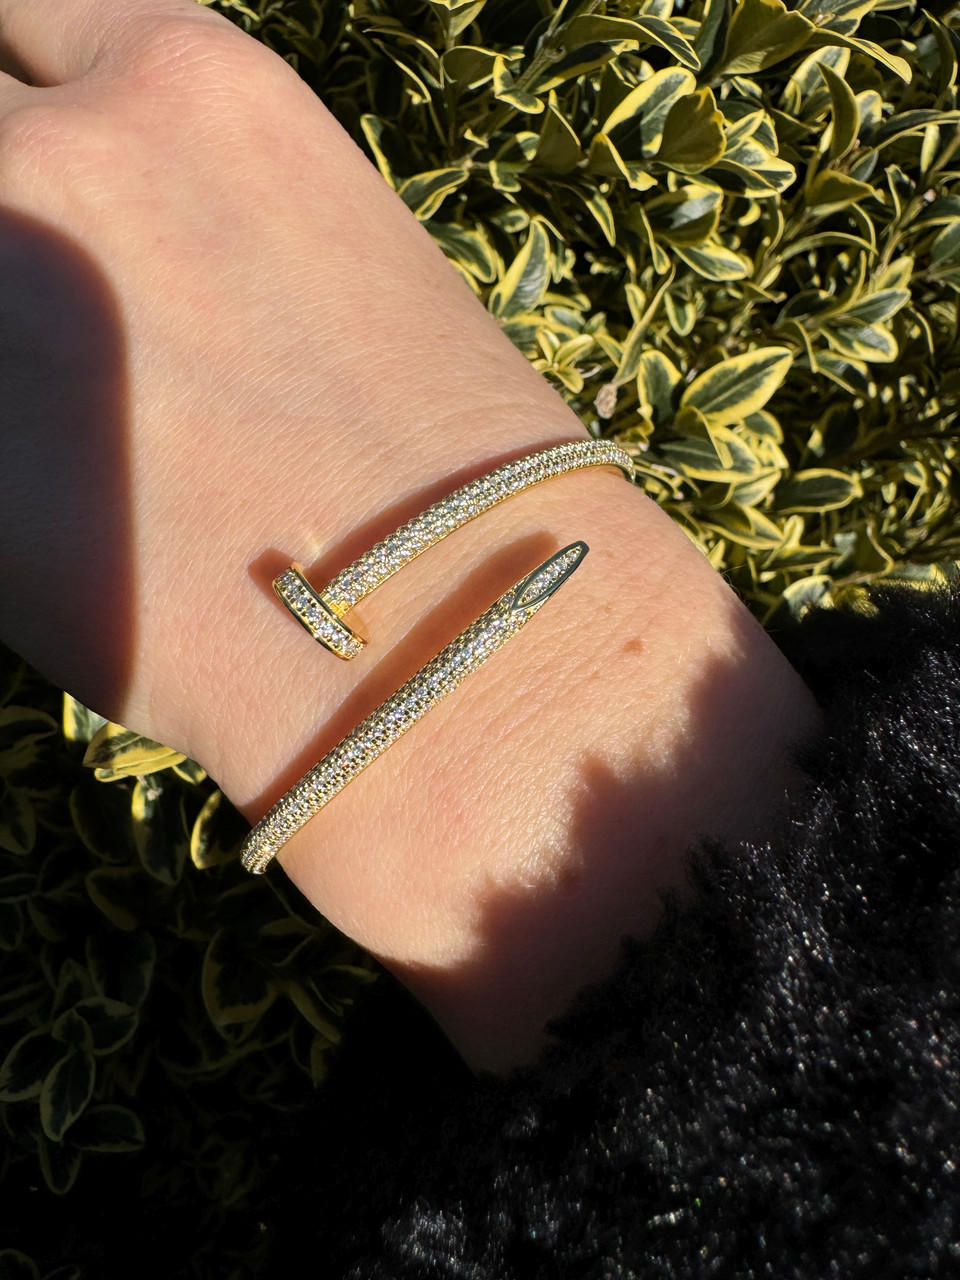 And now for something completely different for the wrist - Cartier Nail  Bracelet - Monochrome Watc… | Cartier nail bracelet, Nail bracelet, Black  hills gold jewelry